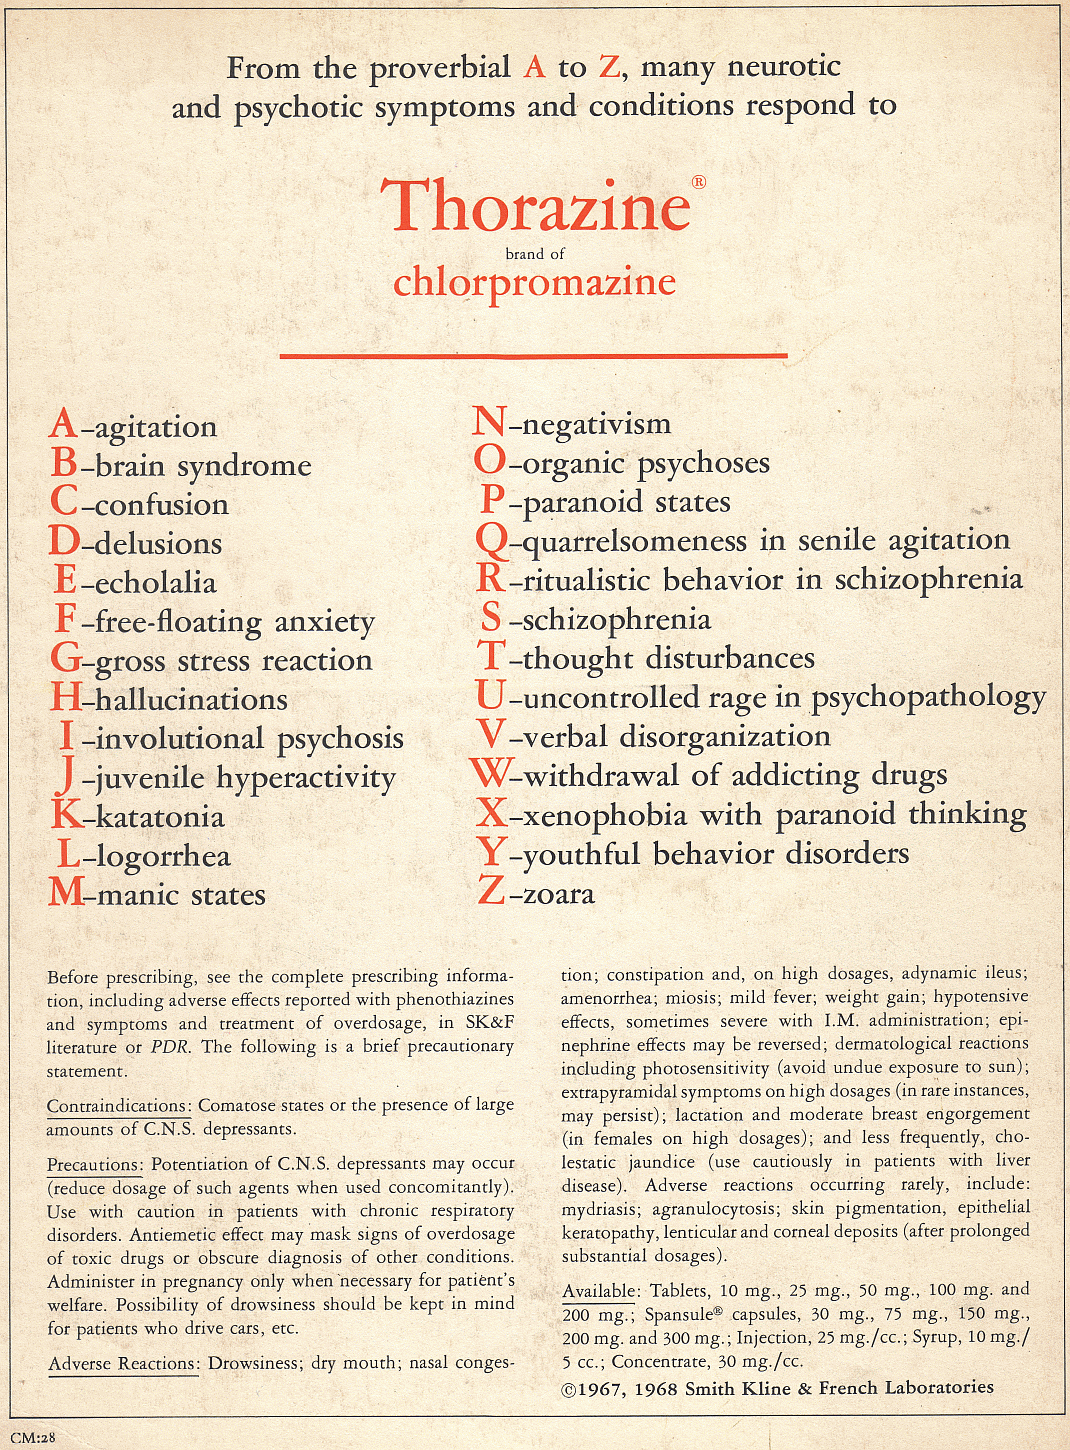 From A (agitation), B (brain syndrome) and C (confusion), to X (xenophobia), Y (youthful behavior disorders) and Z (zoara), many symptoms respond to Thorazine.  Zoara is another word for insomnia.